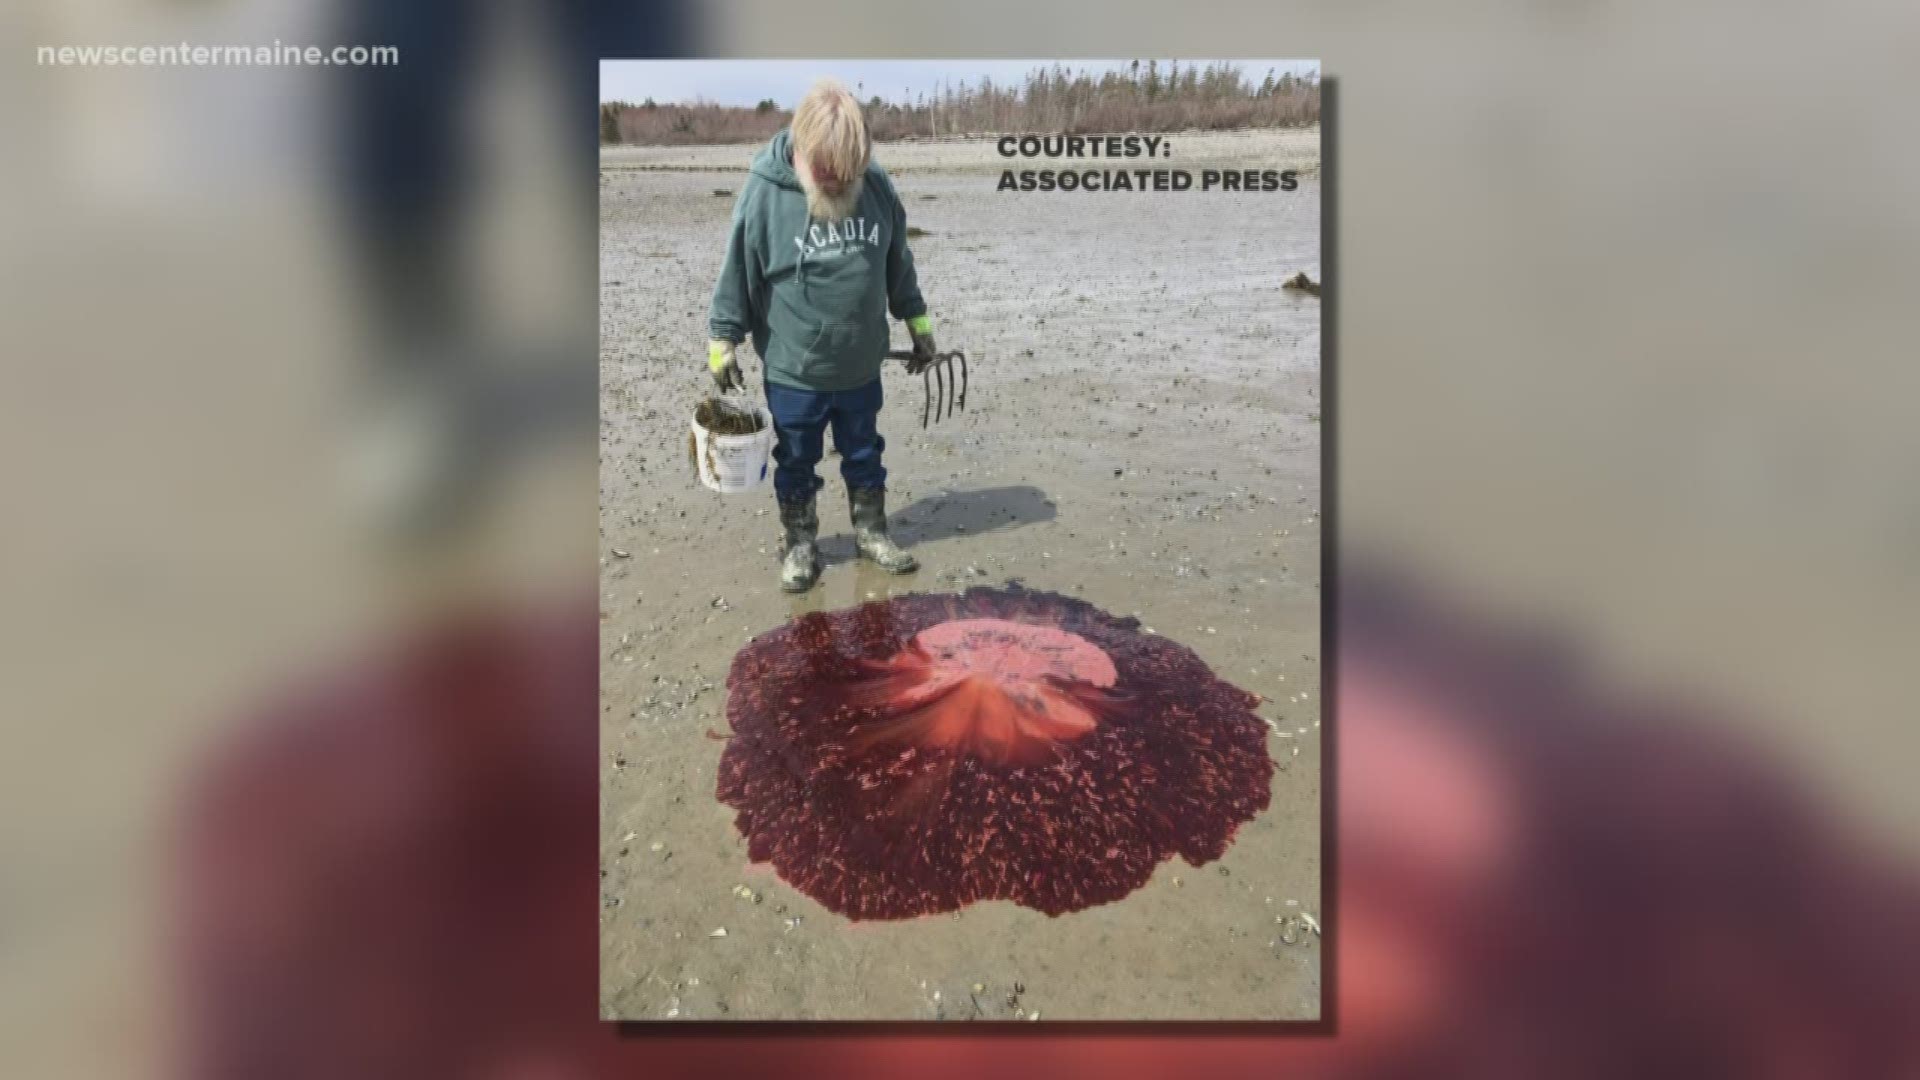 There have been a lot of large jellyfish sightings in the Gulf of Maine and on beaches in recent months.